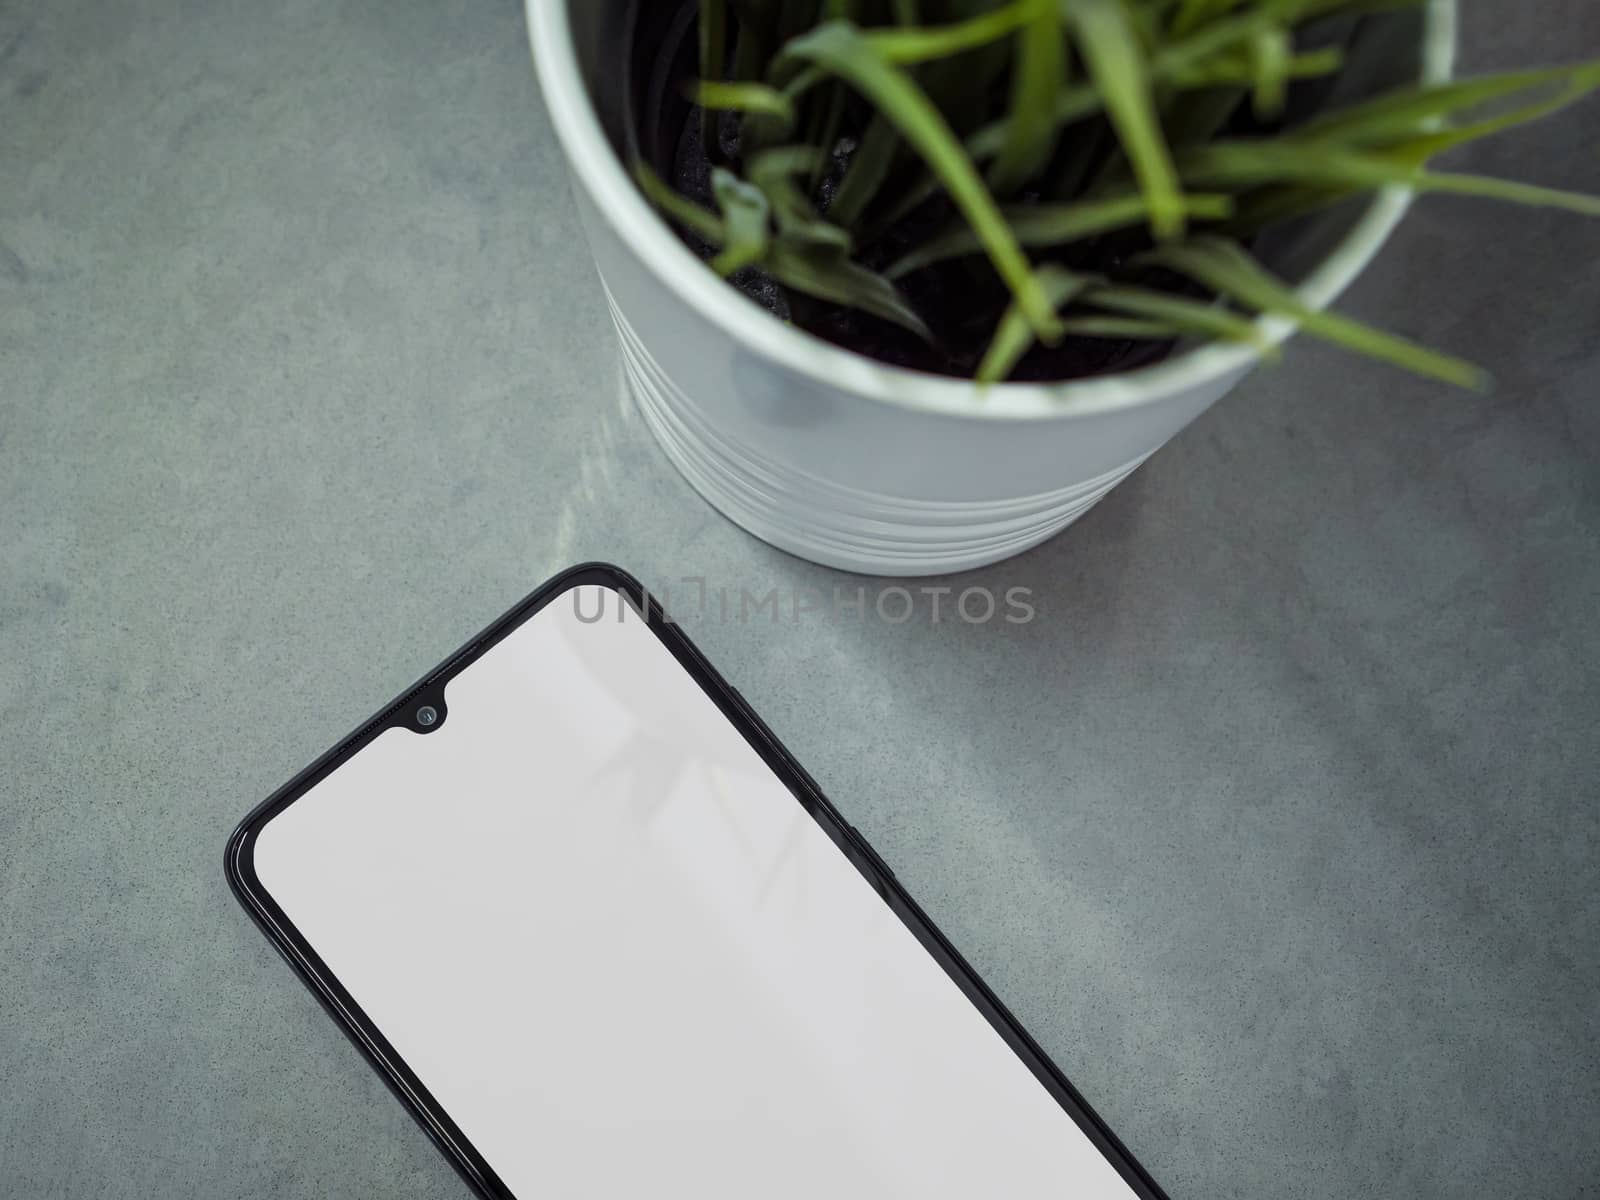 Modern minimalist workspace with black mobile smartphone mockup lies on the surface with a blank screen. Office desk table with a green plant. Top view flat lay closeup on grey marble stone background